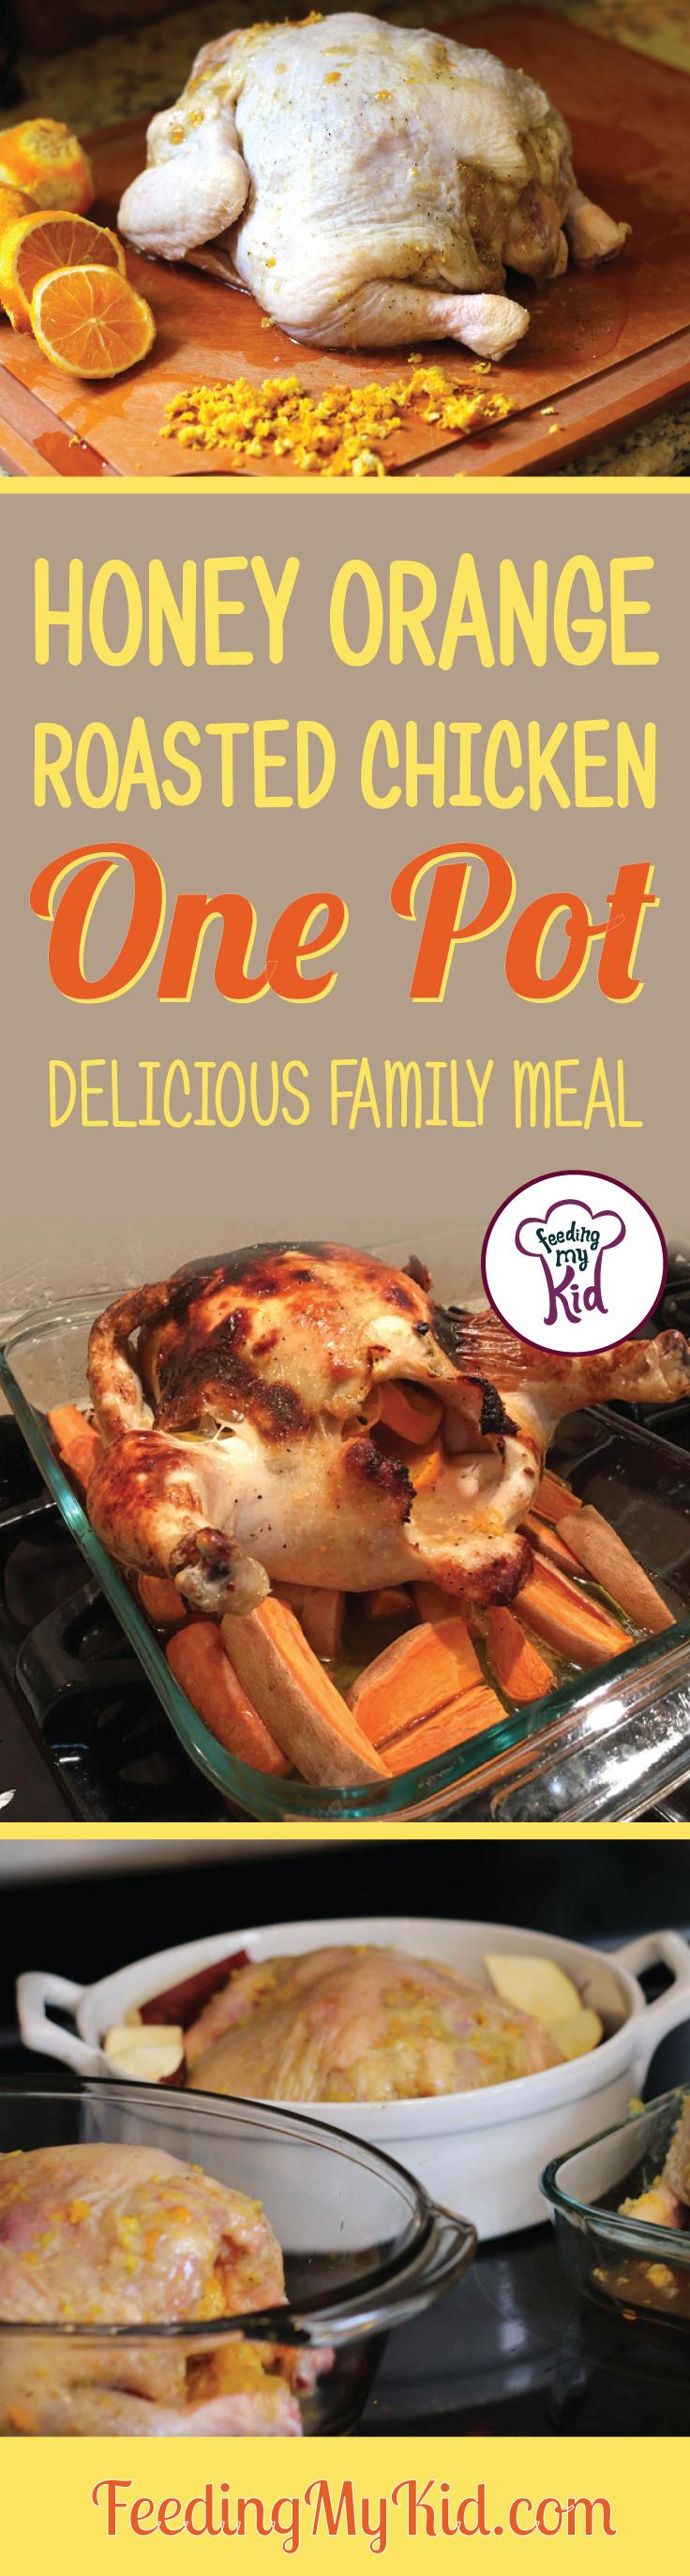 Save tons of money by roasting a chicken. This is a super easy and delicious recipe that will feed your whole family and have leftovers the next day. #chickenrecipe #wholechickenrecipe